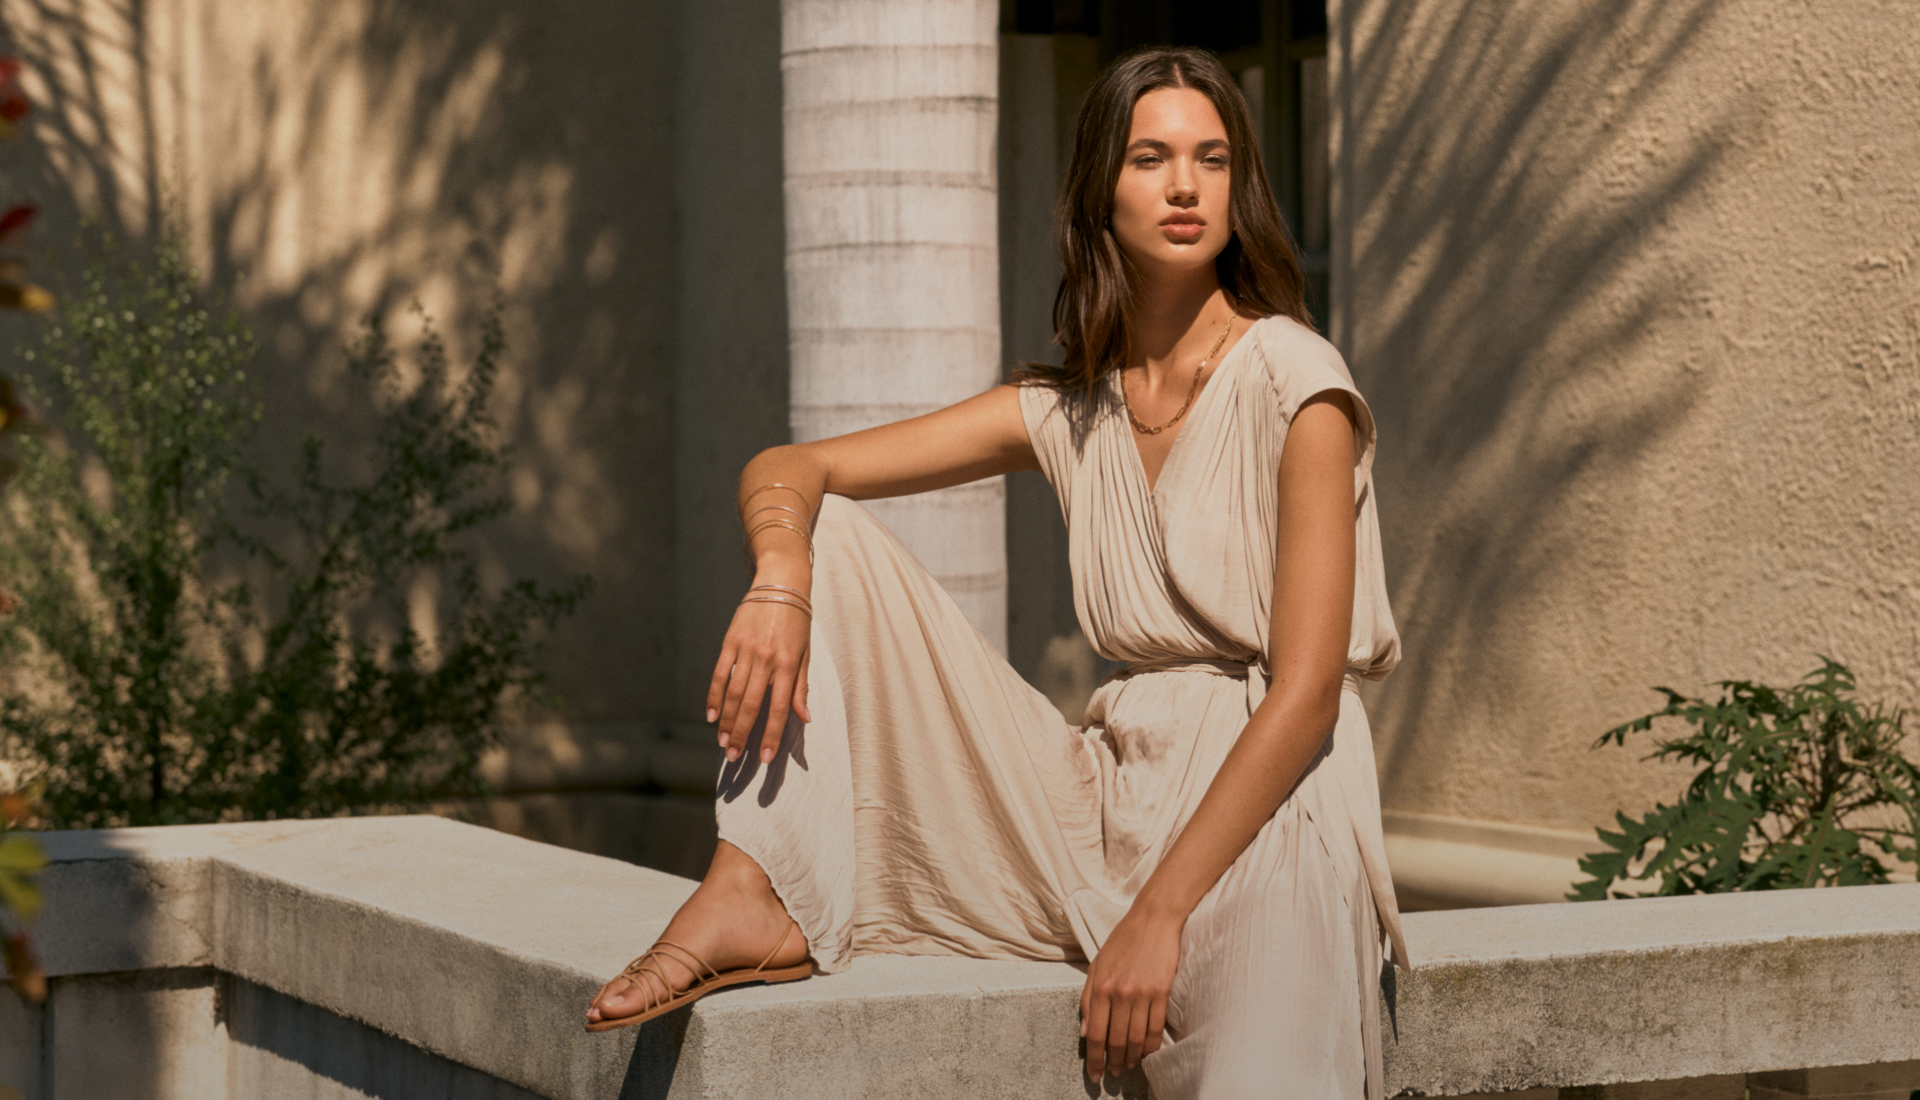 400+ New Styles. Discover all you need for the season, from weekdays to getaways, with a new collection of versatile summer essentials. Shop Now